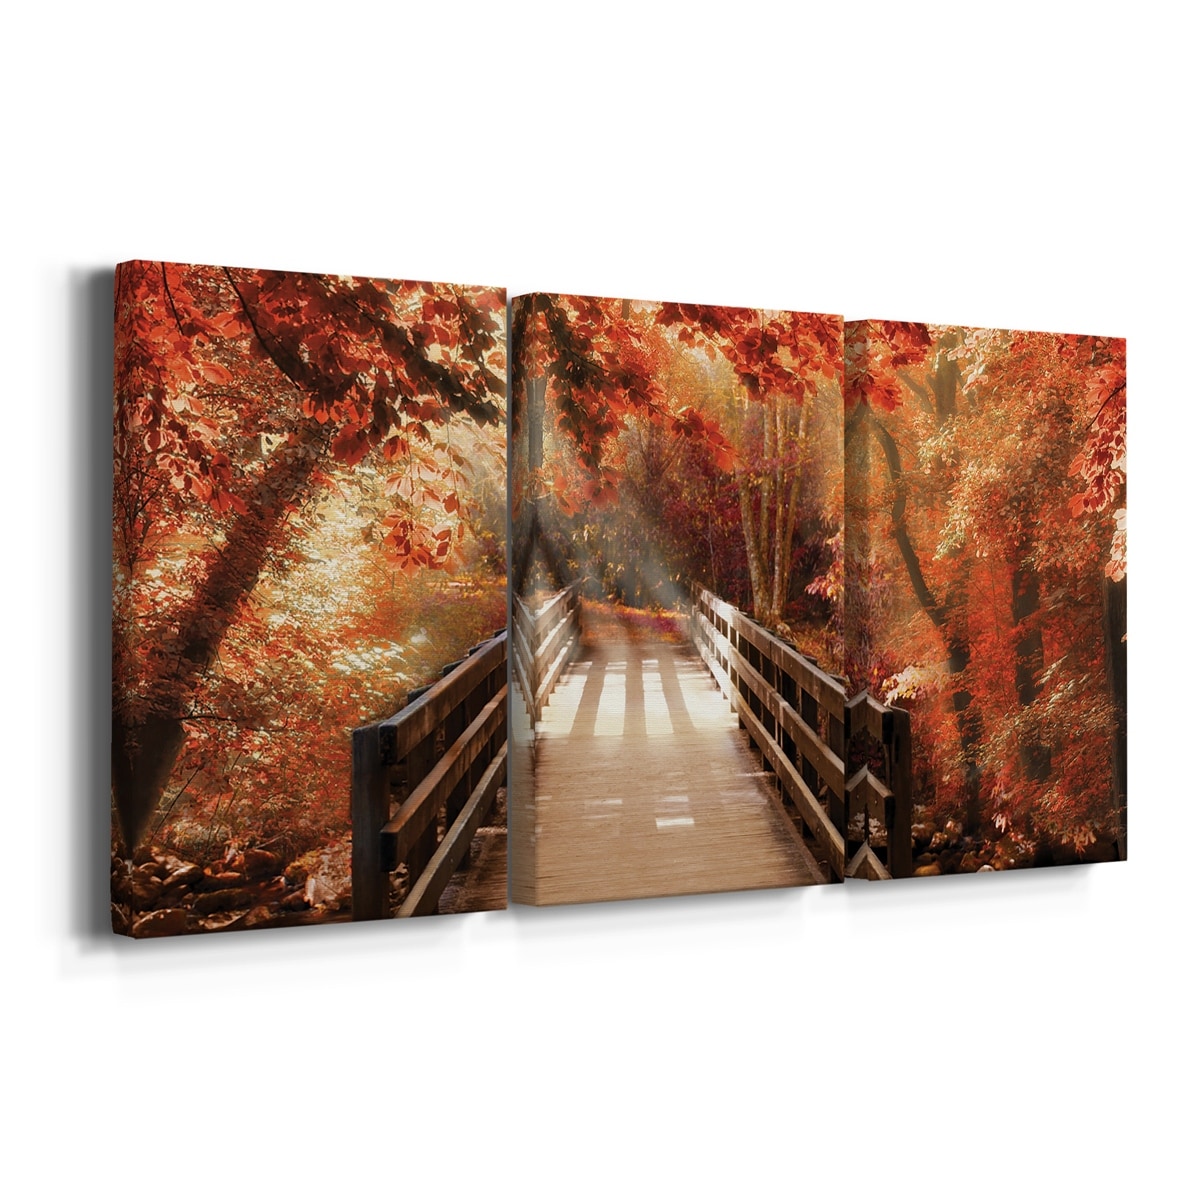 Autumn Bridge- Premium Gallery Wrapped Canvas Ready to Hang Bed Bath   Beyond 34597653